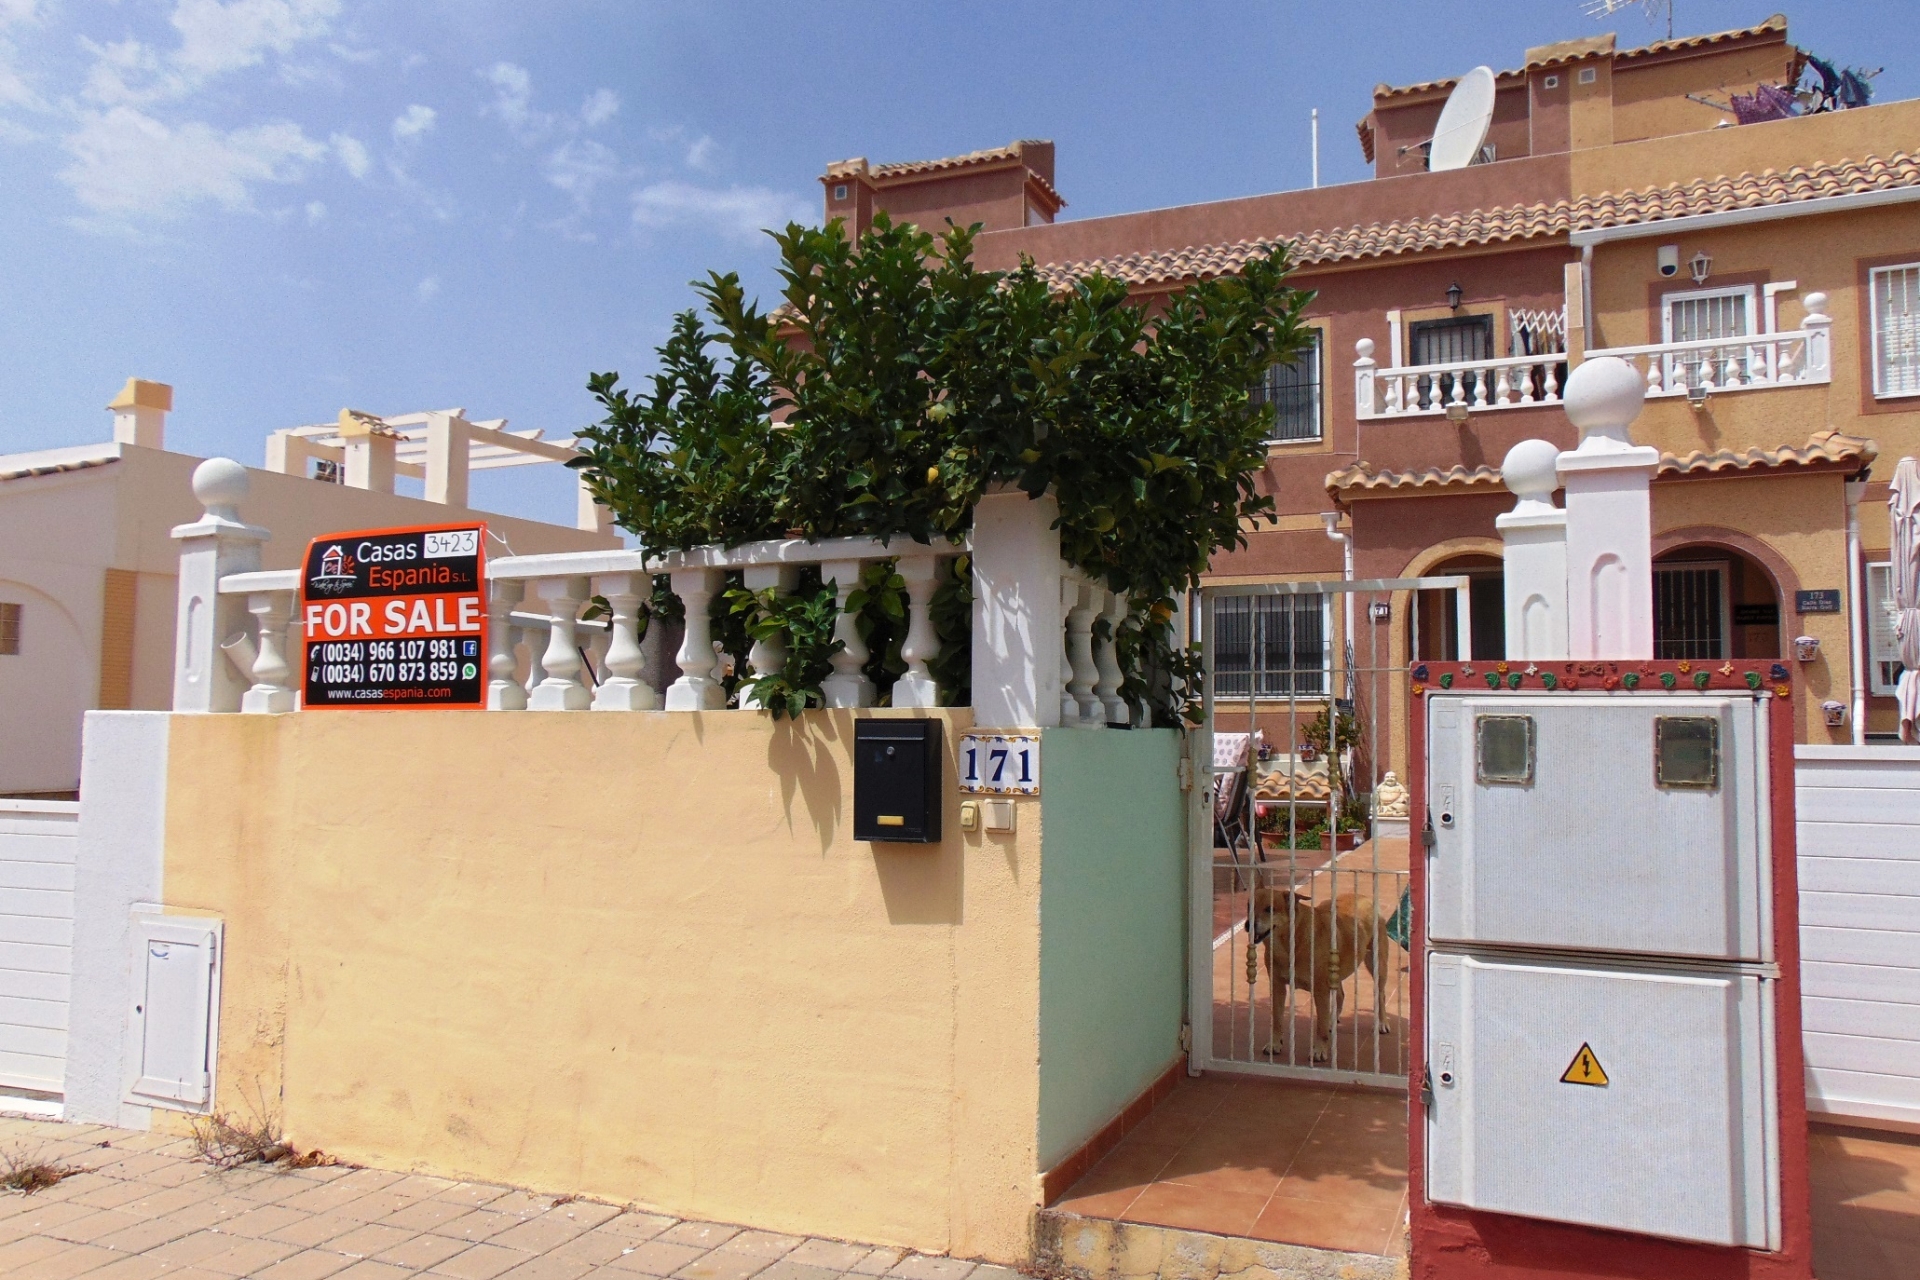 Property on Hold - Townhouse for sale - Balsicas - Sierra Golf